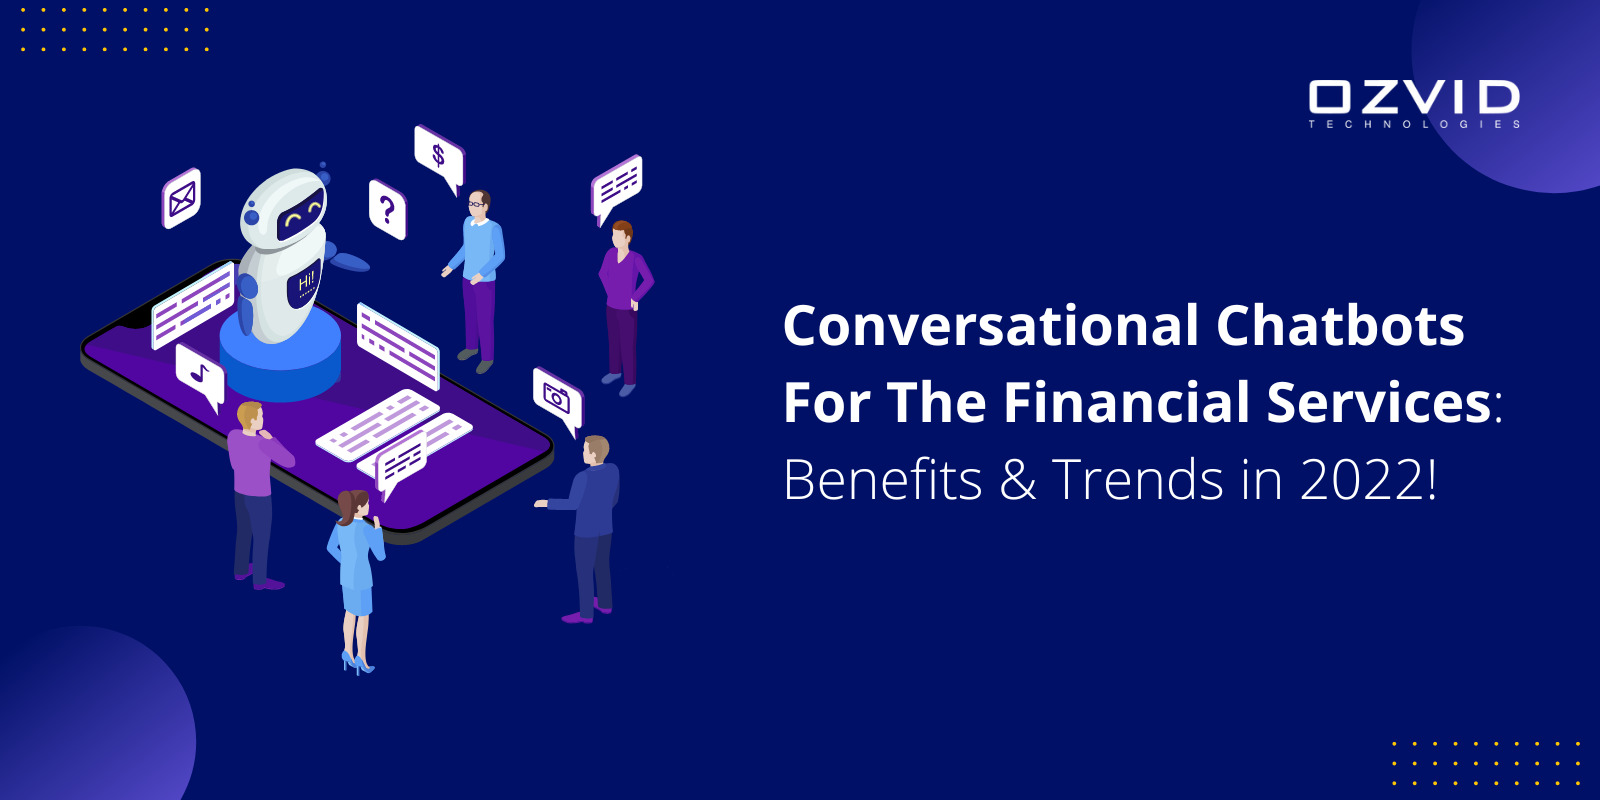 Conversational Chatbots For The Financial Services: Benefits And Trends In 2022!